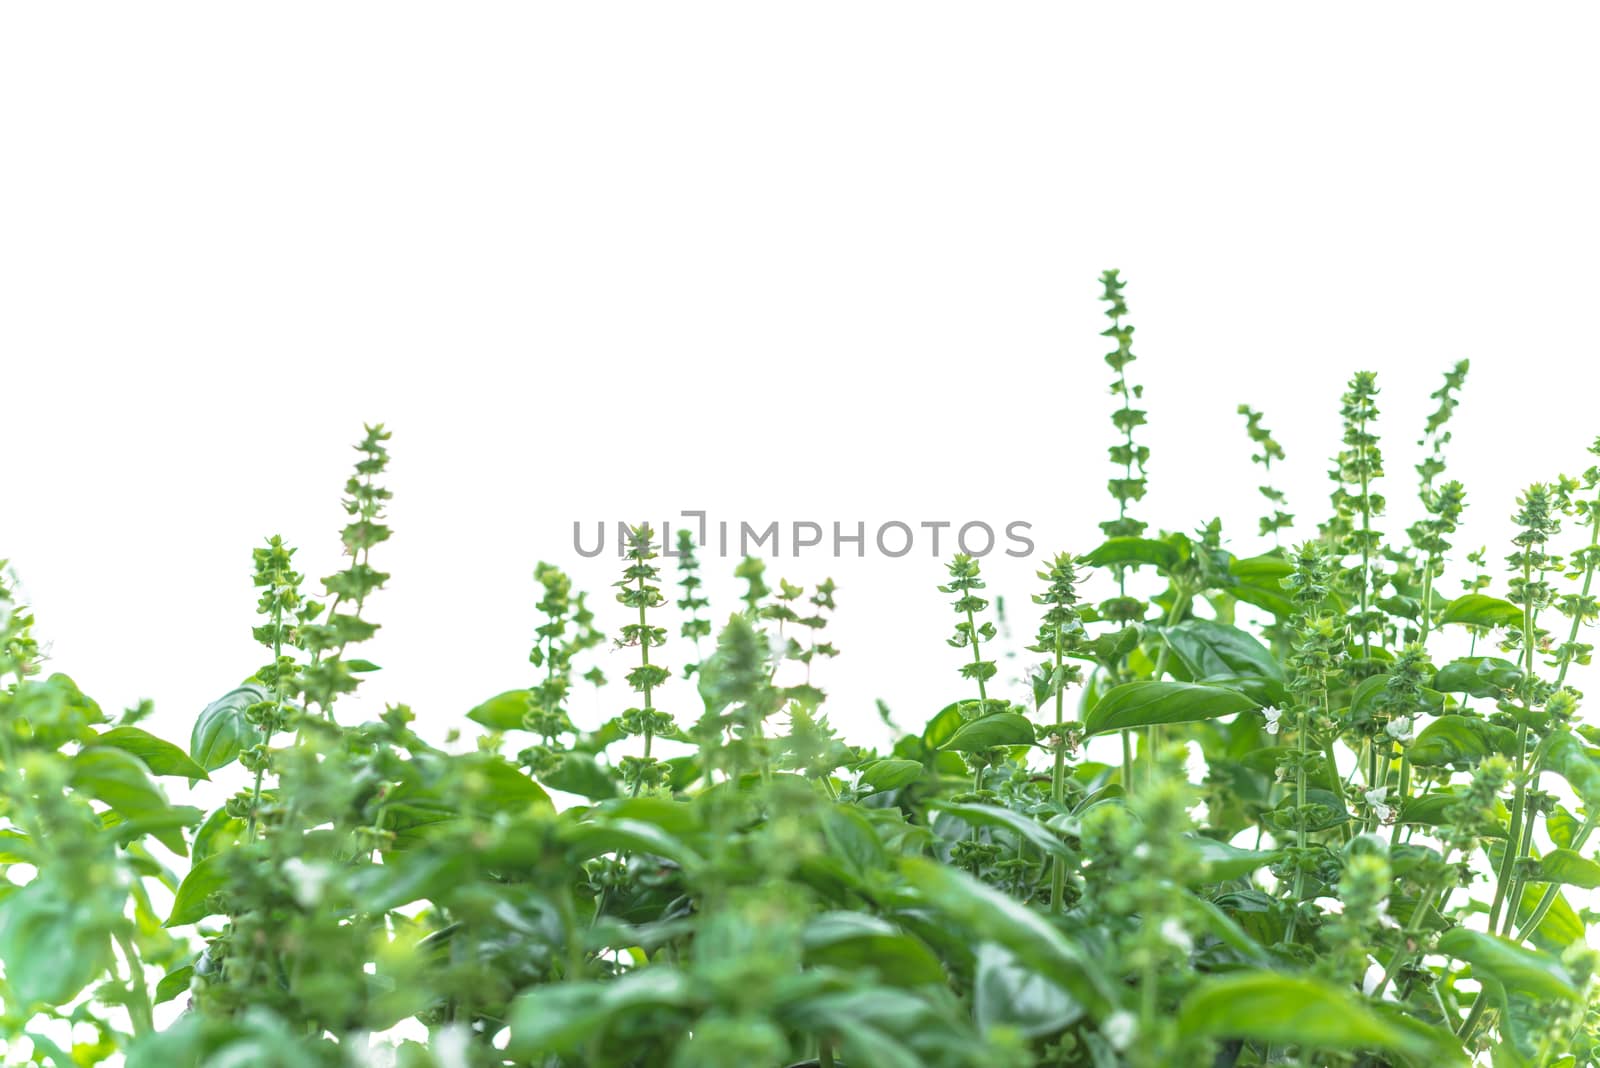 Large bush of sweet basil plants with blooming flowers isolated on white background. Blossom homegrown Lamiaceae culinary herb at organic backyard garden in Texas, America